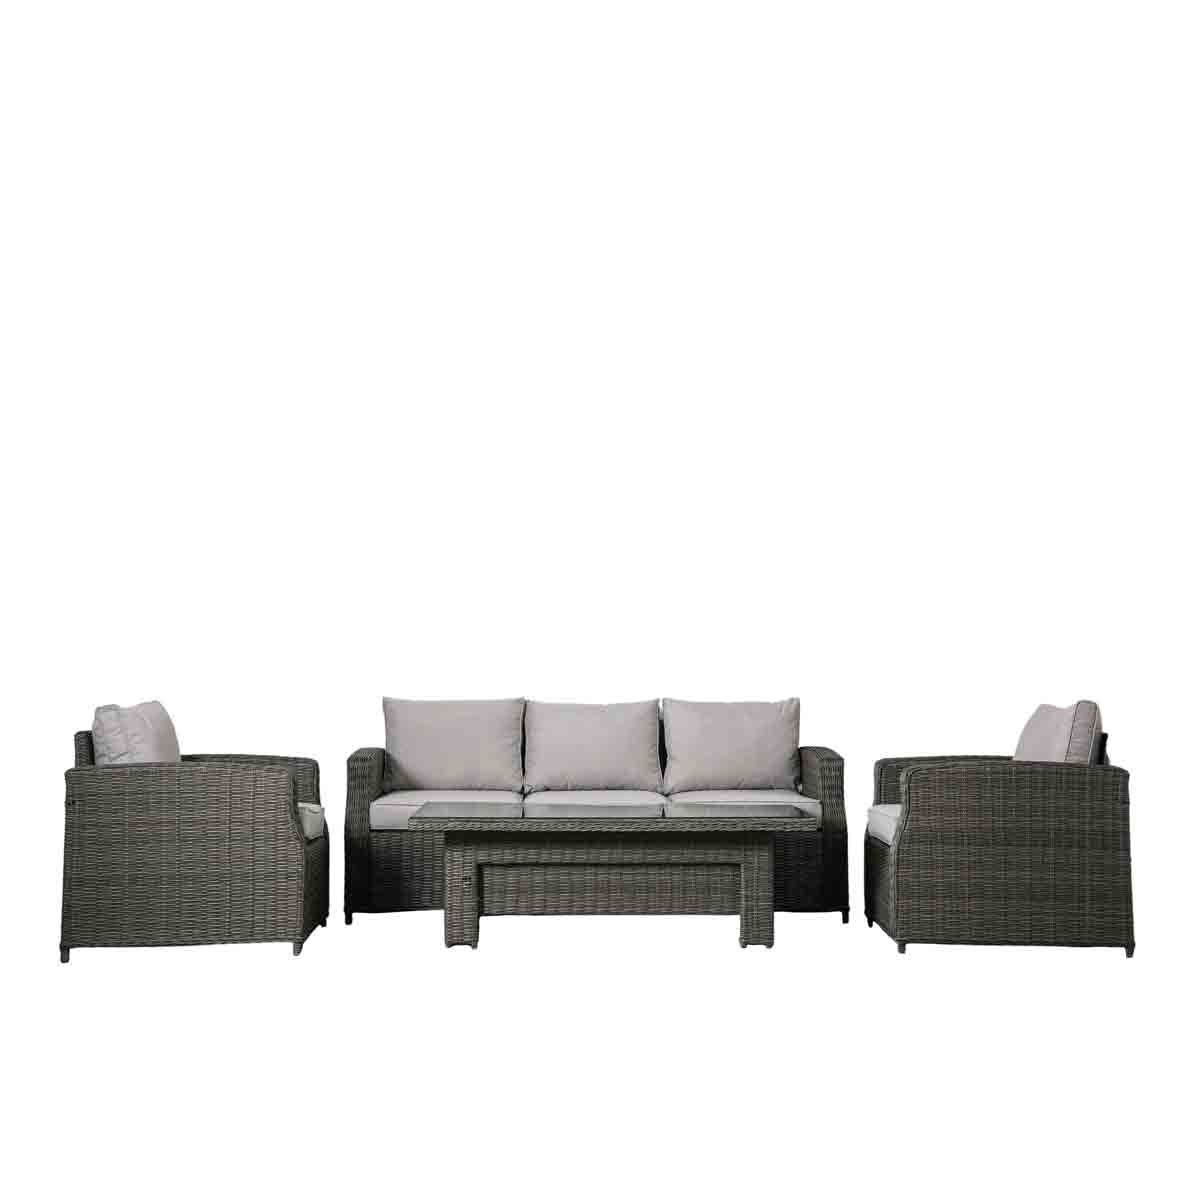 Crossland Grove Louis 3 Seater Sofa Dining Set With Rising Table - Grey